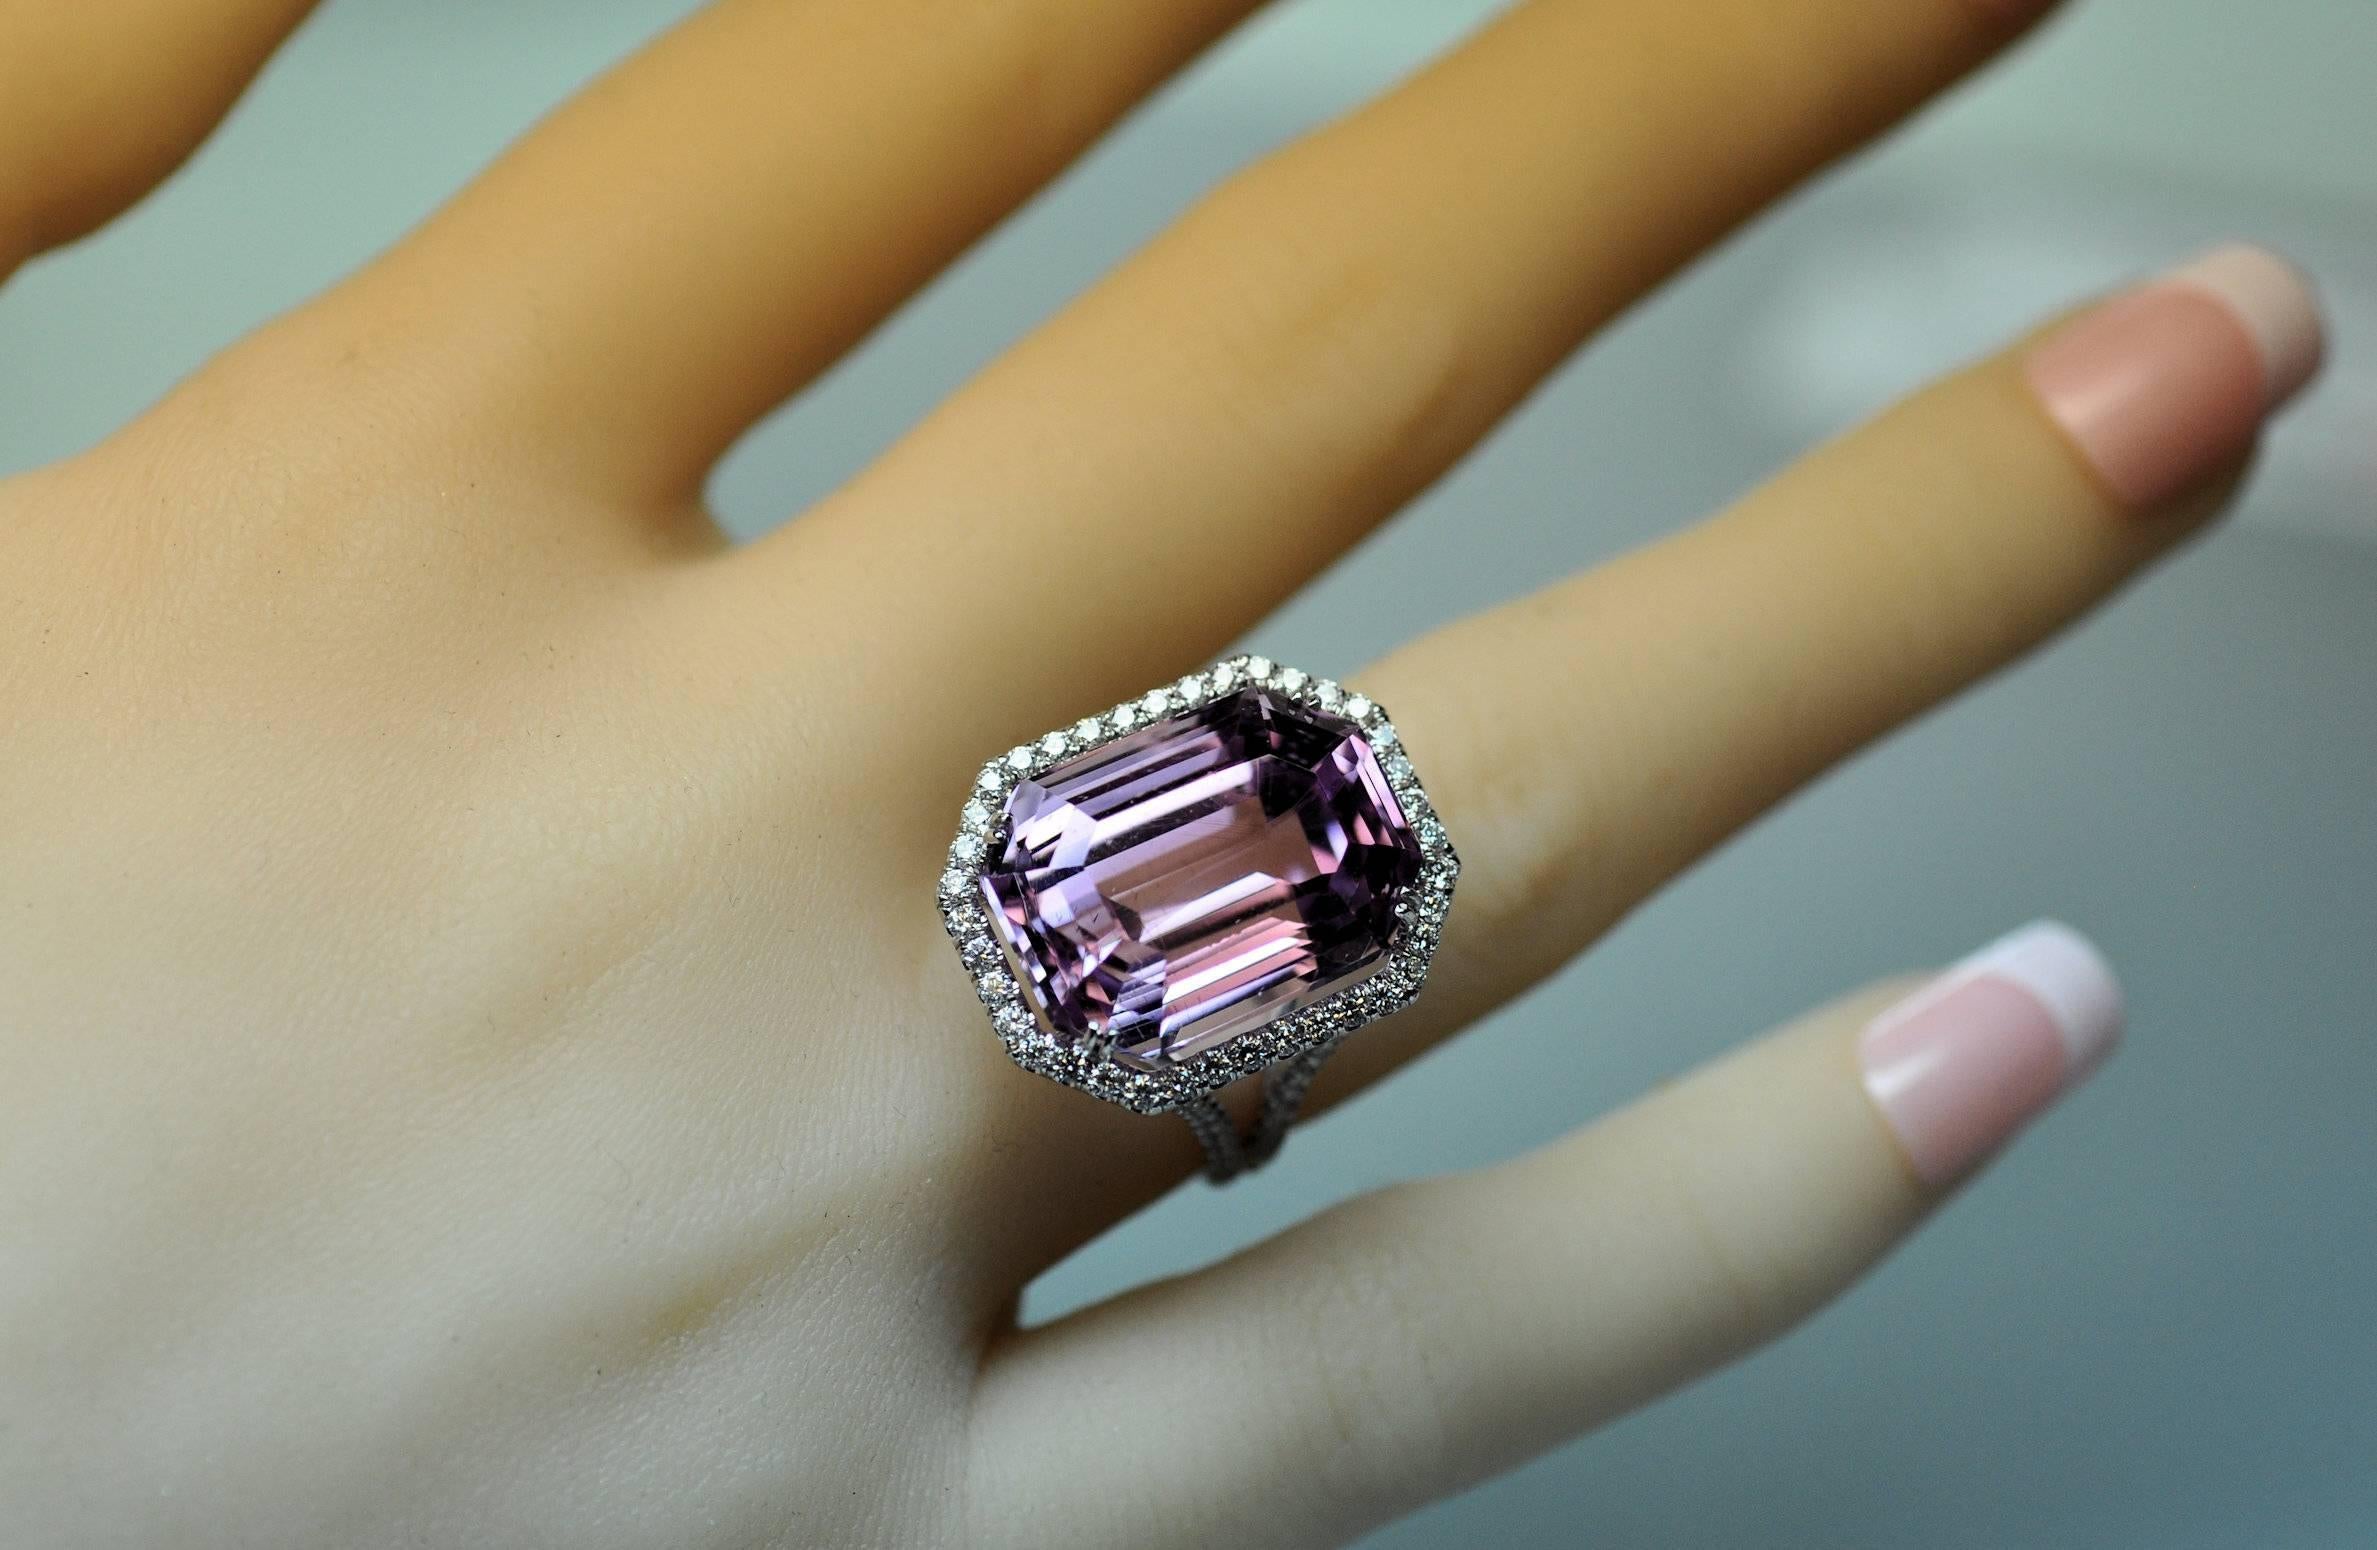 New custom, hand made ring in 18 Karat white gold set with emerald cut Kunzite gemstone. 
The Kunzite weighs approximately 25.40 carats and exhibits the lovely, rich pink with strong lavender overtones.  It glows!!
Accompanied by 110 round diamonds